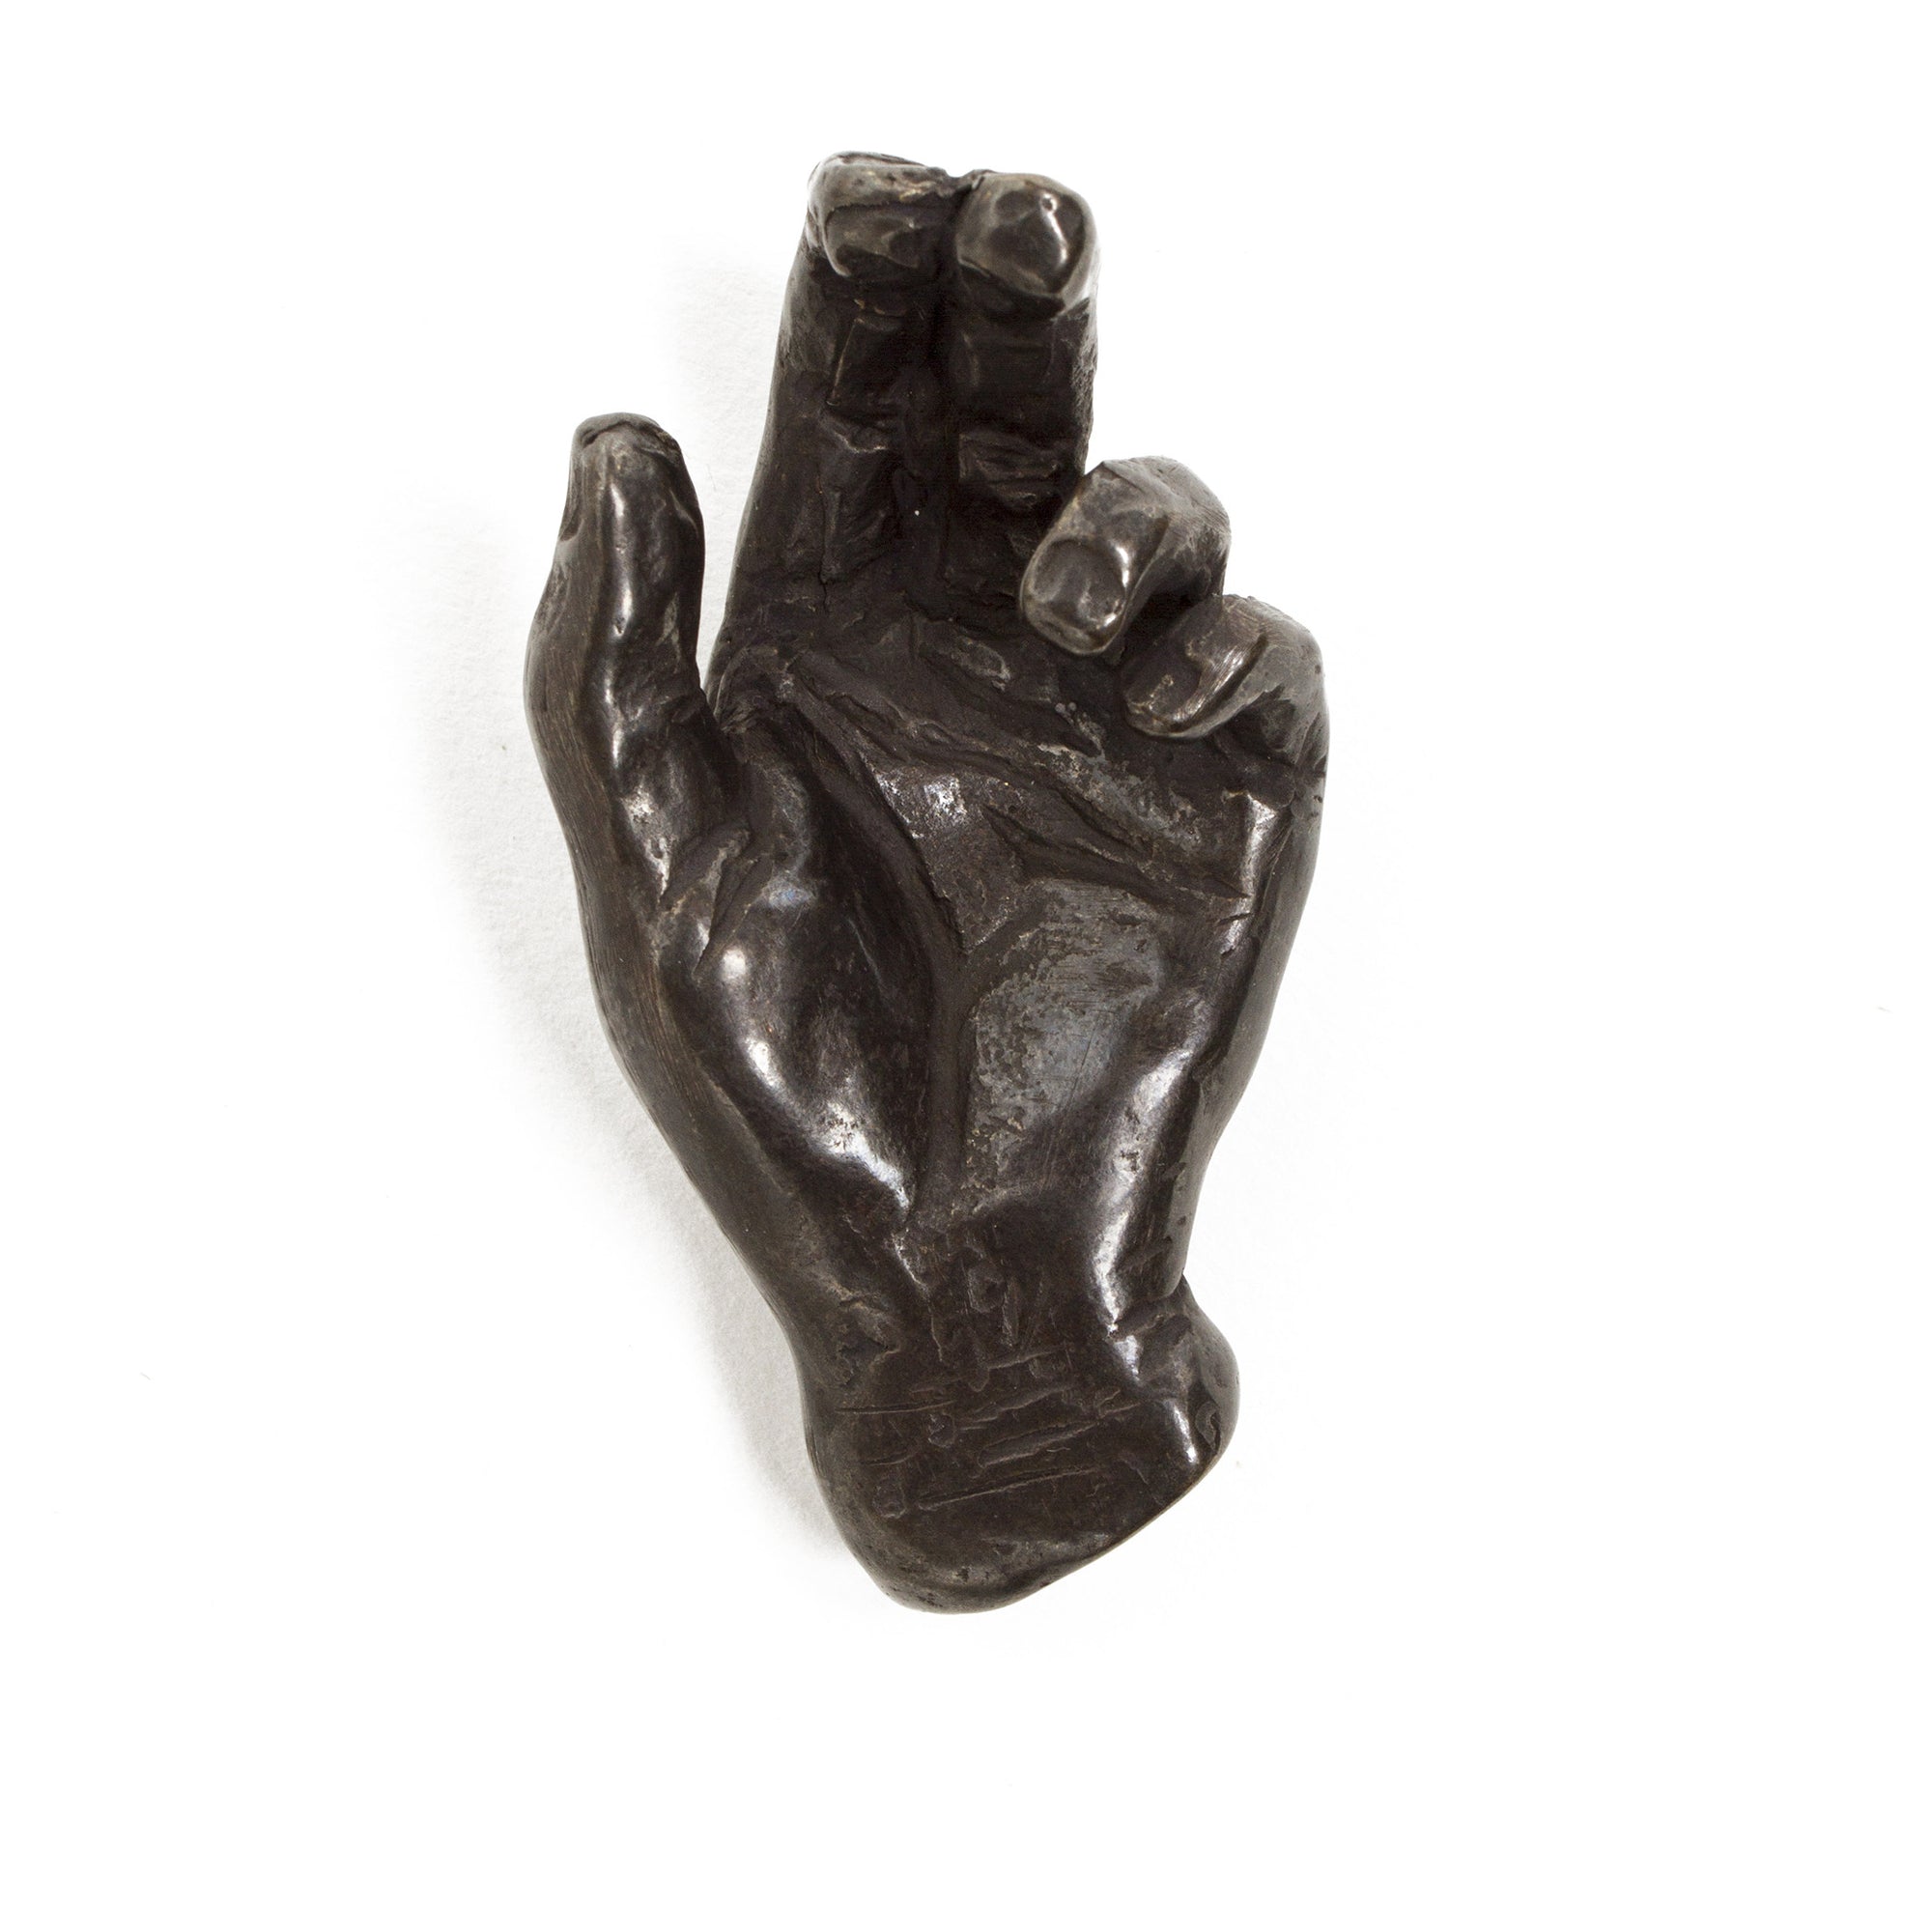 Miniature Cast Bronze Hand in Blessing Gesture | Getty Store